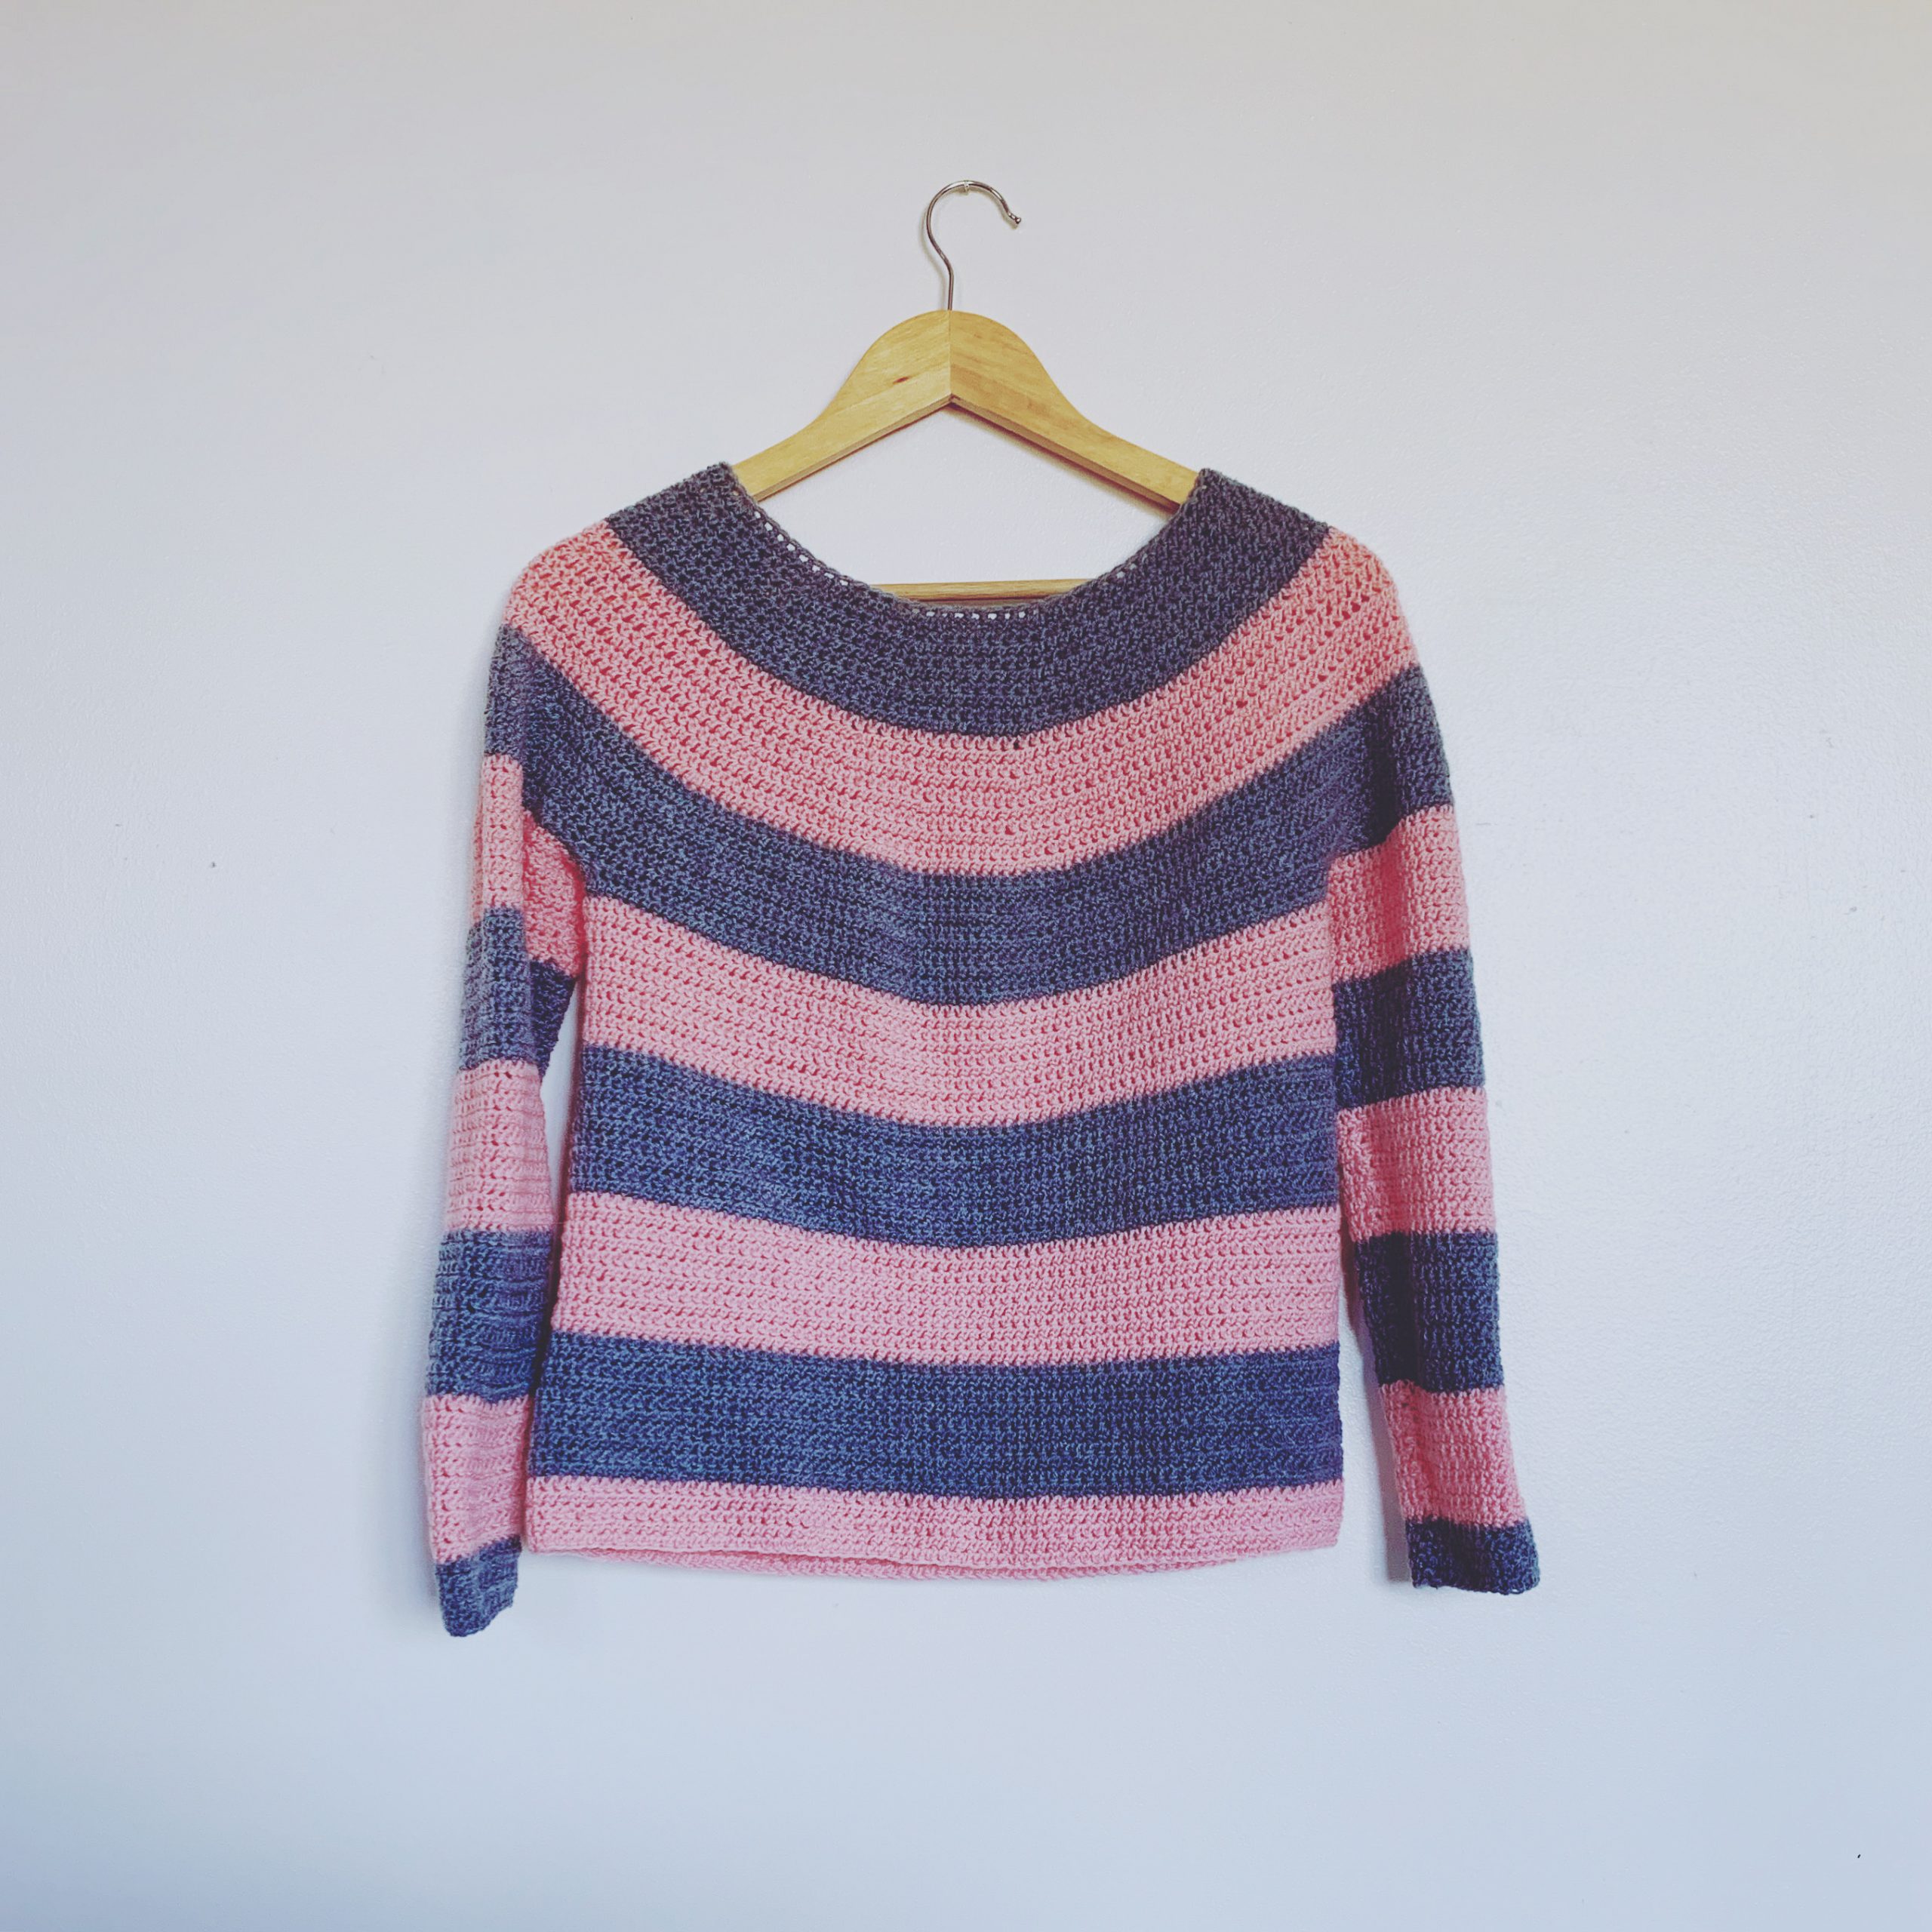 A 4ply pink and grey crochet striped sweater hangs on a white wall